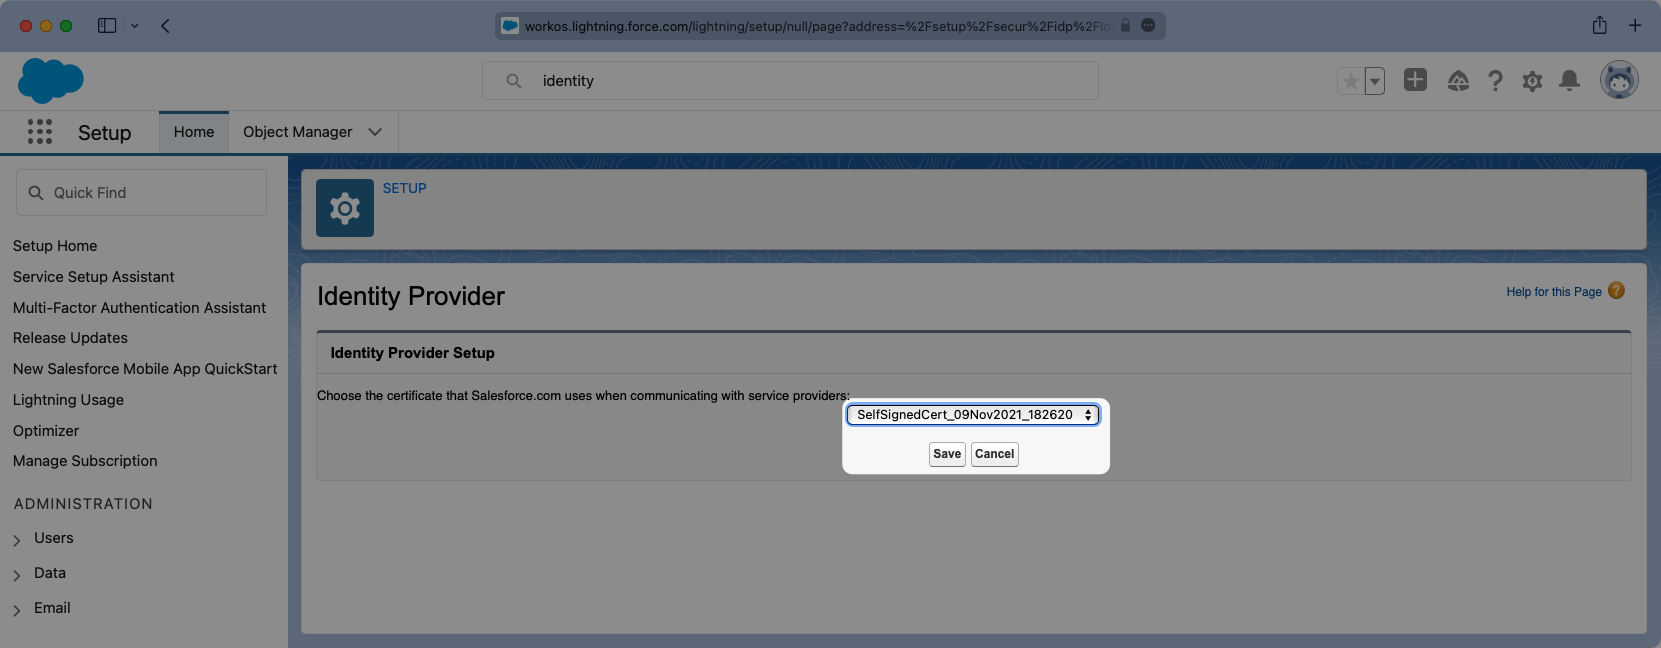 A screenshot showing how to select the SAML certificate for the Identity Provider setup in the Salesforce dashboard.